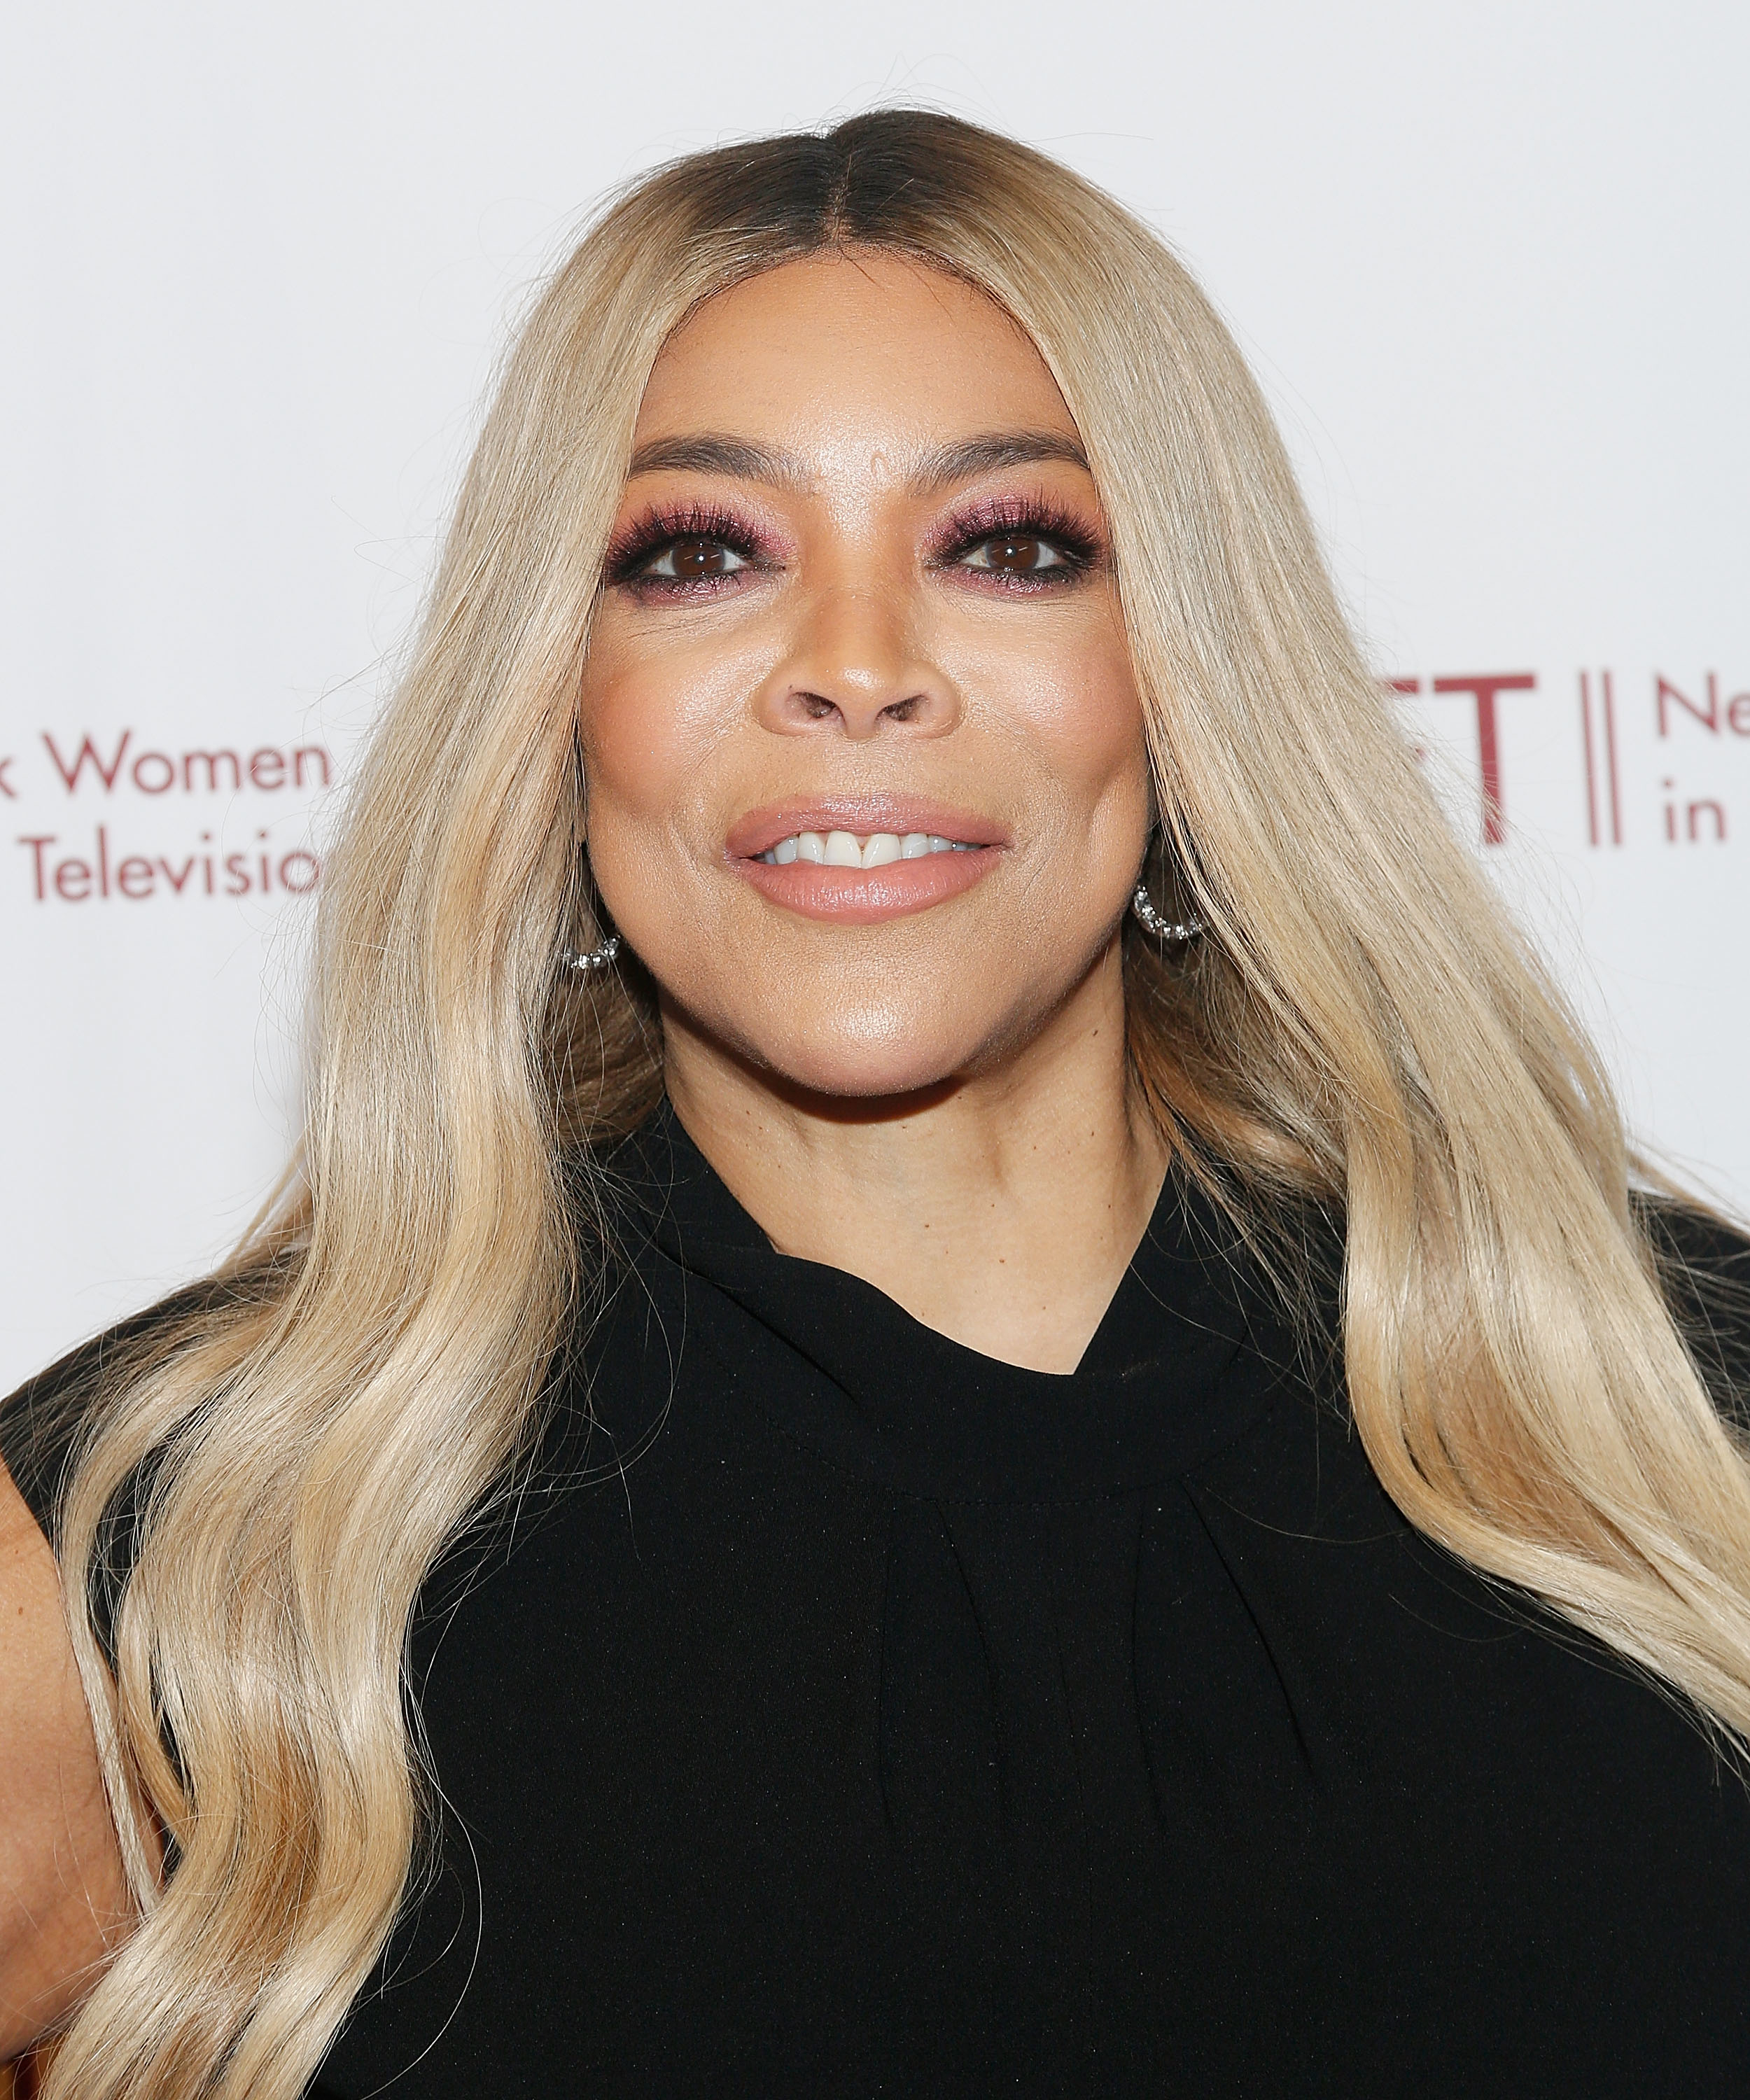 A closeup of Wendy Williams wearing a dress, smiling at an event